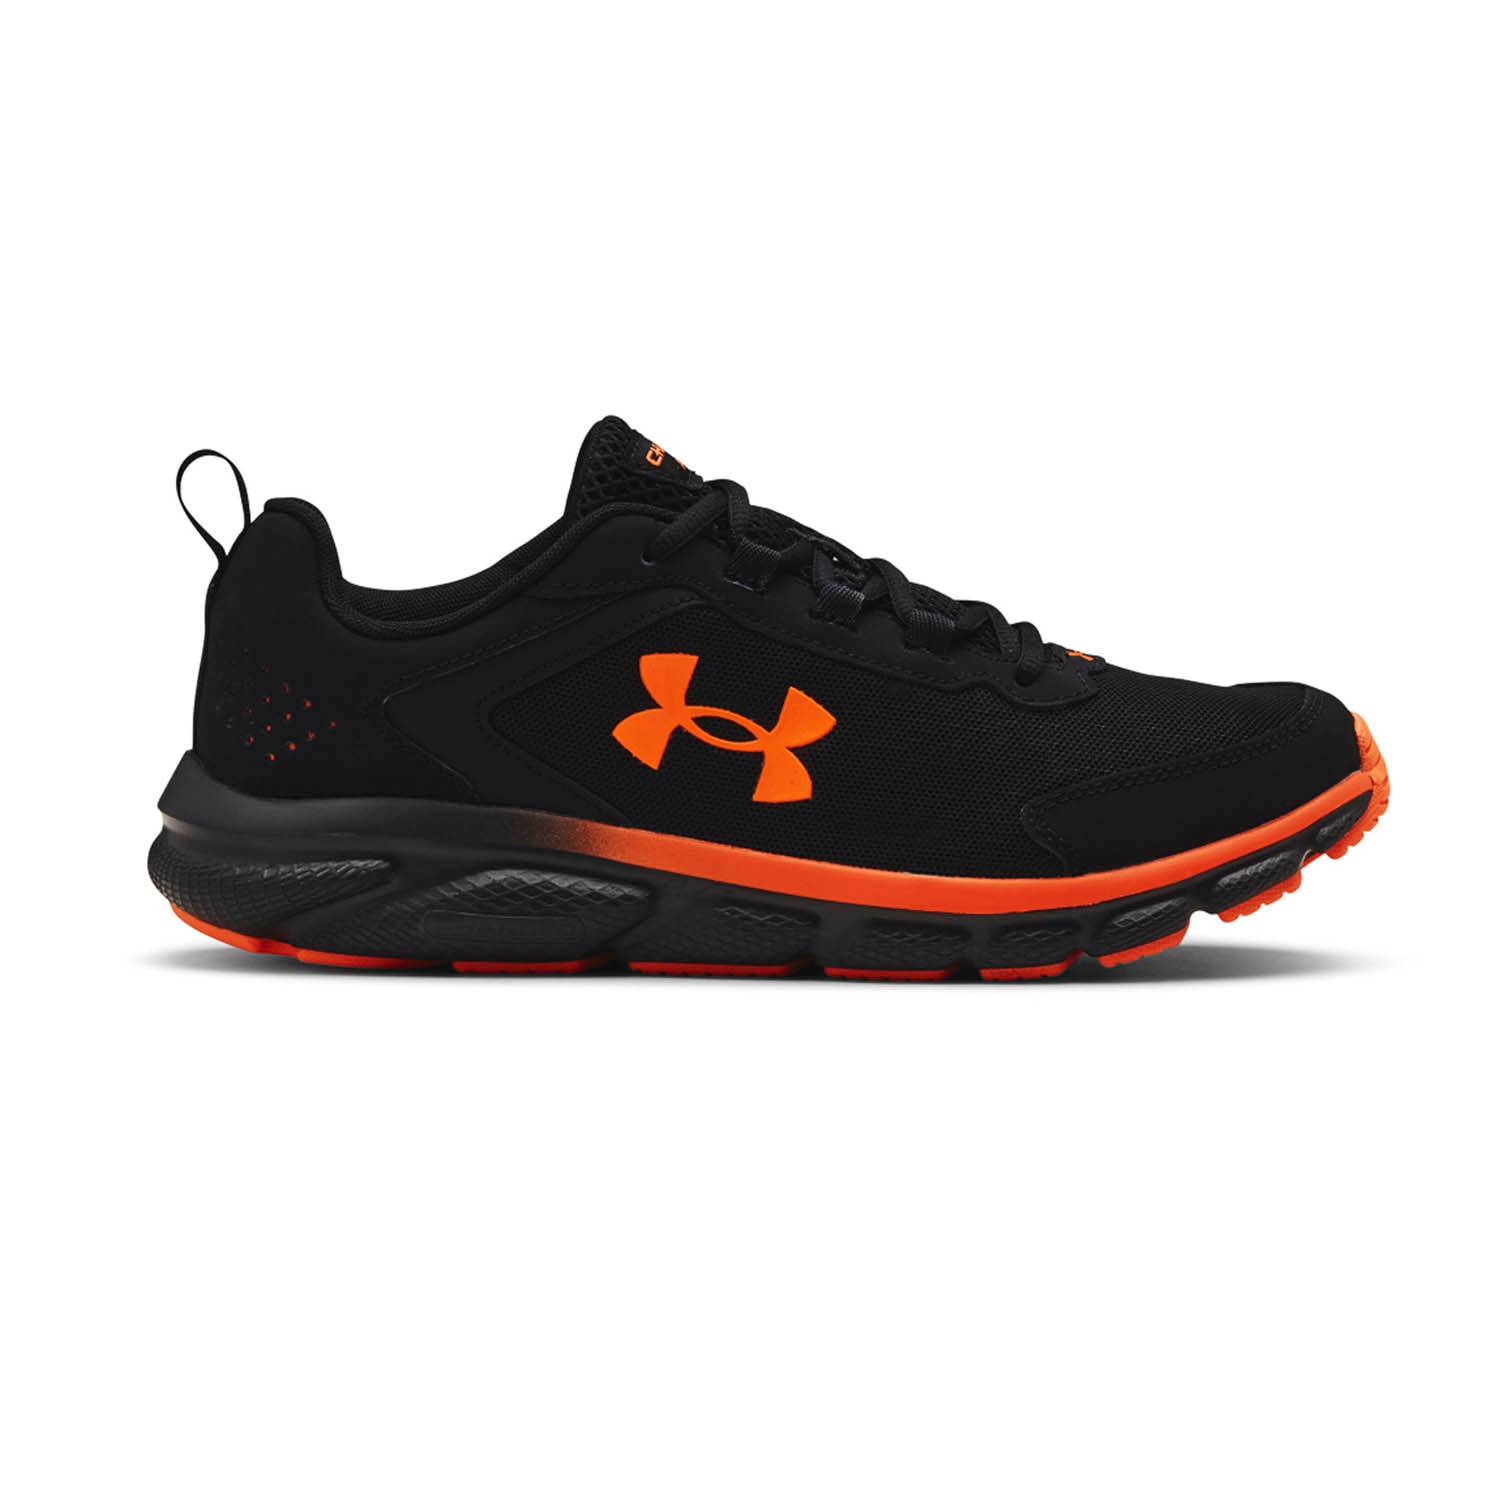 Under Armour Men's Charged Assert 9 Running Shoes